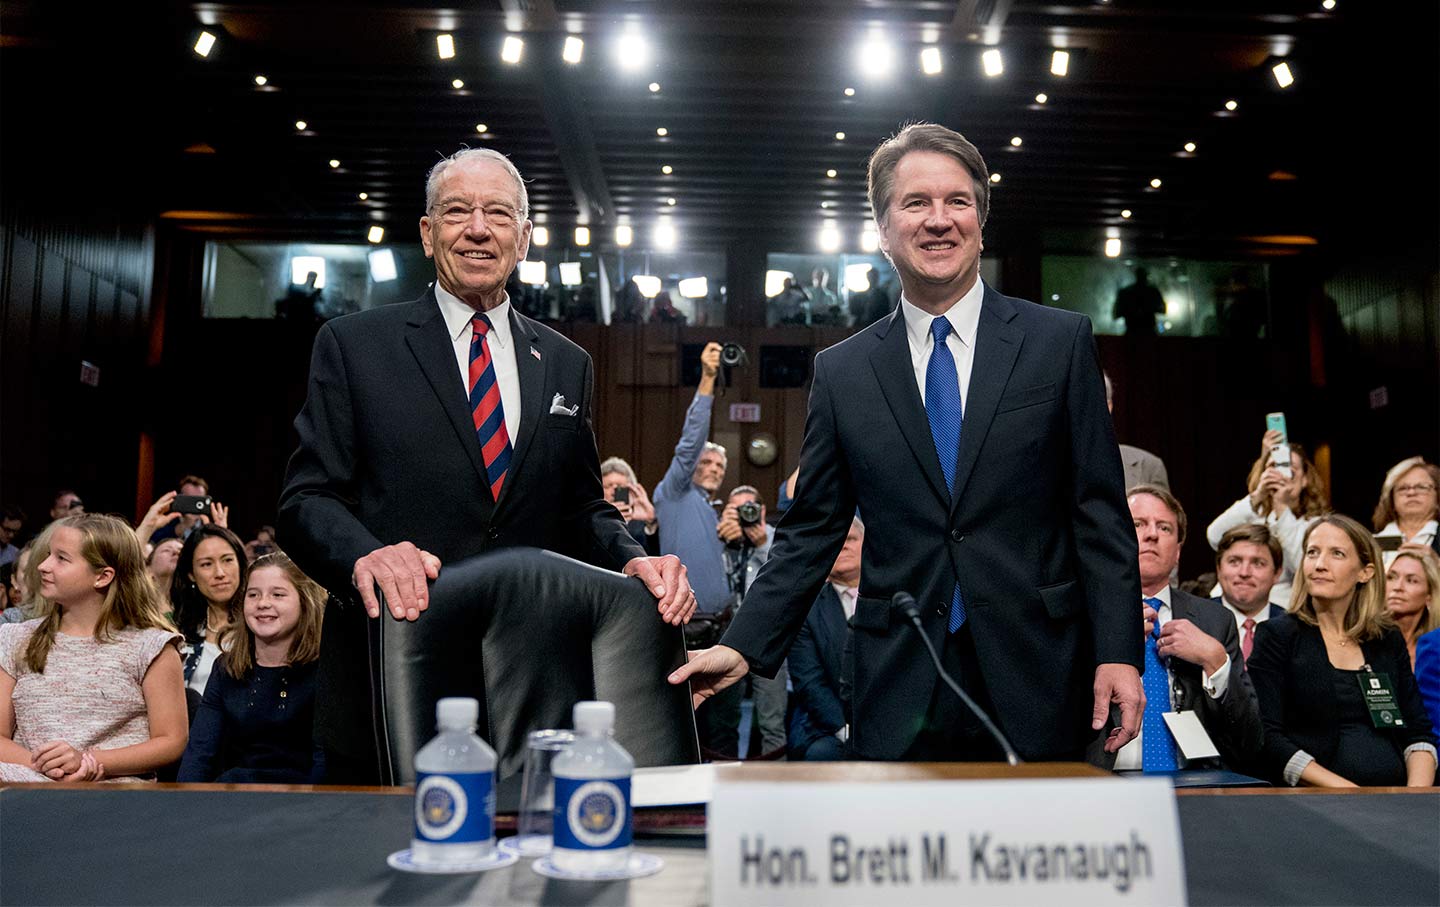 Grassley and Kavanaugh first day of hearing